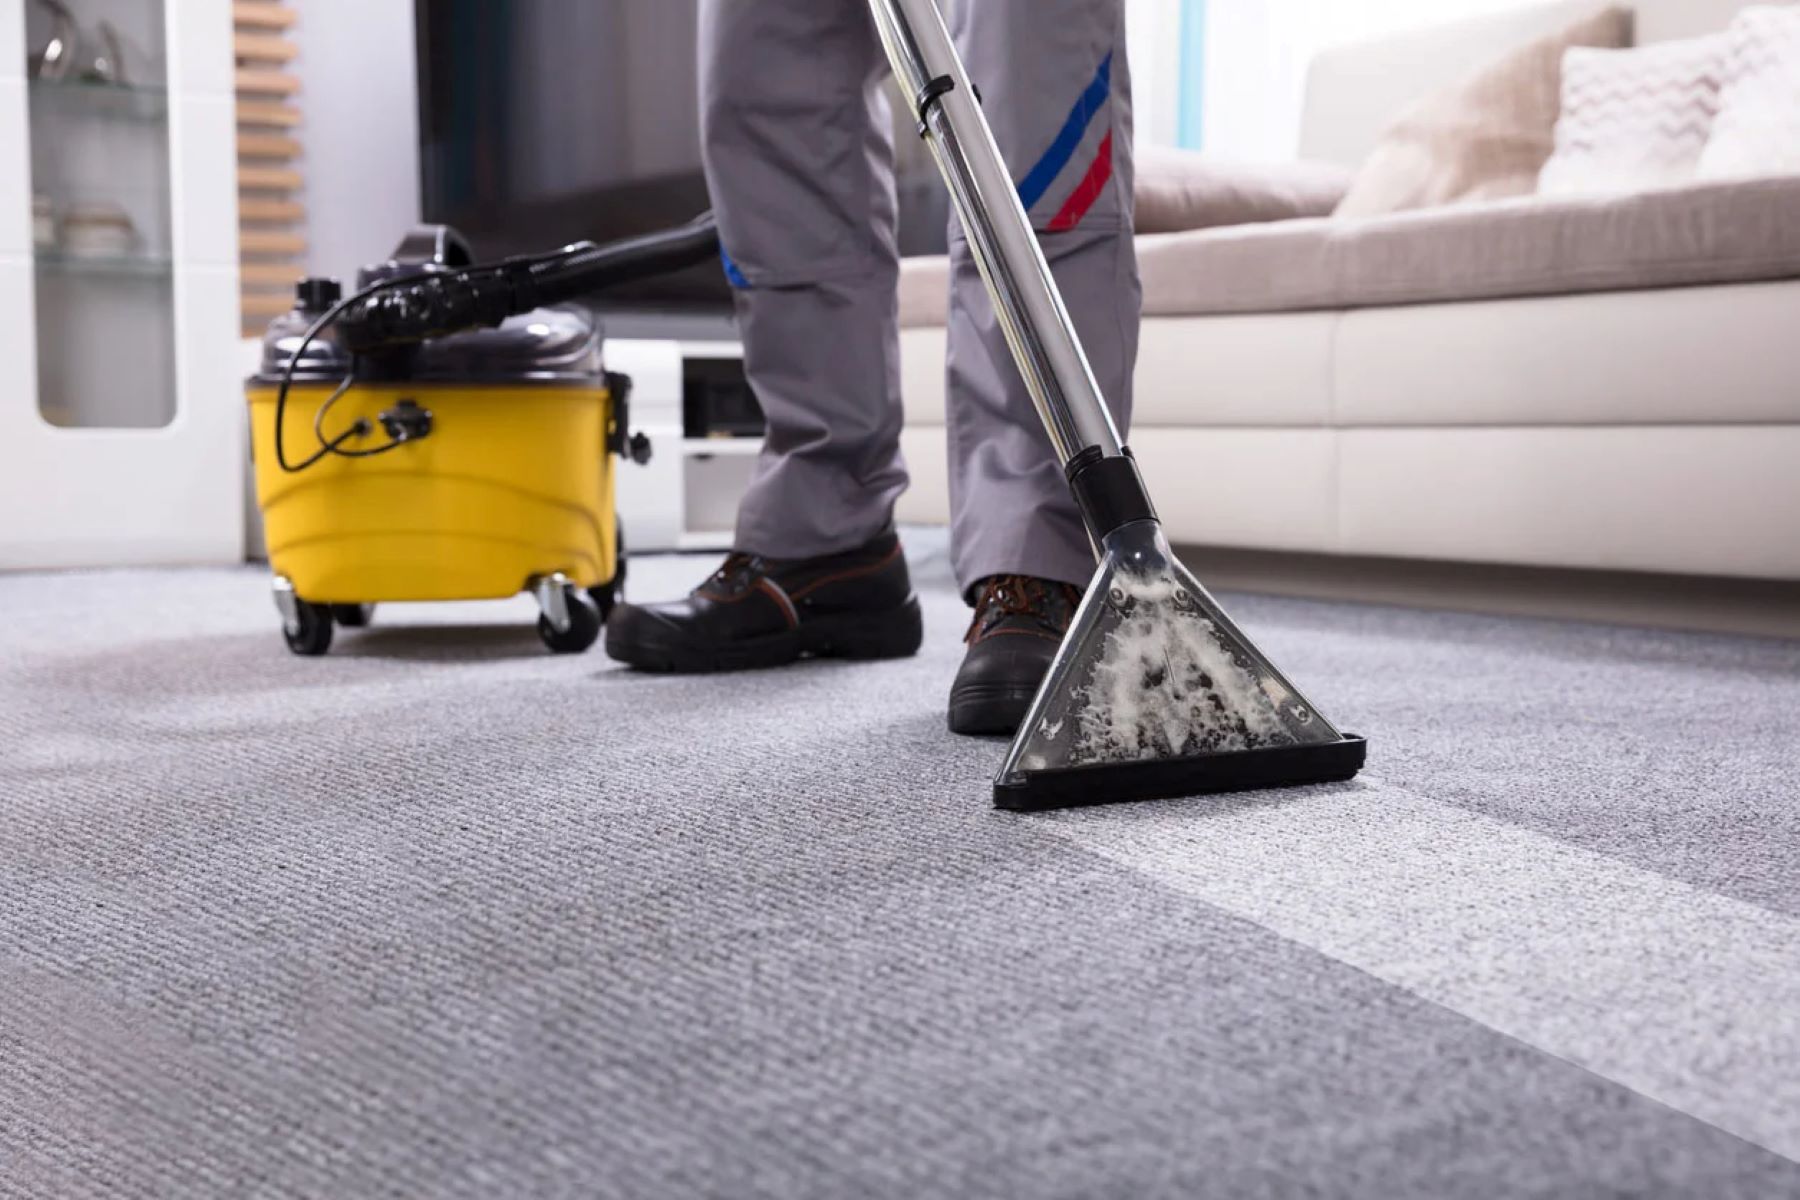 How Much Is Carpet Deodorizer Per Square Foot